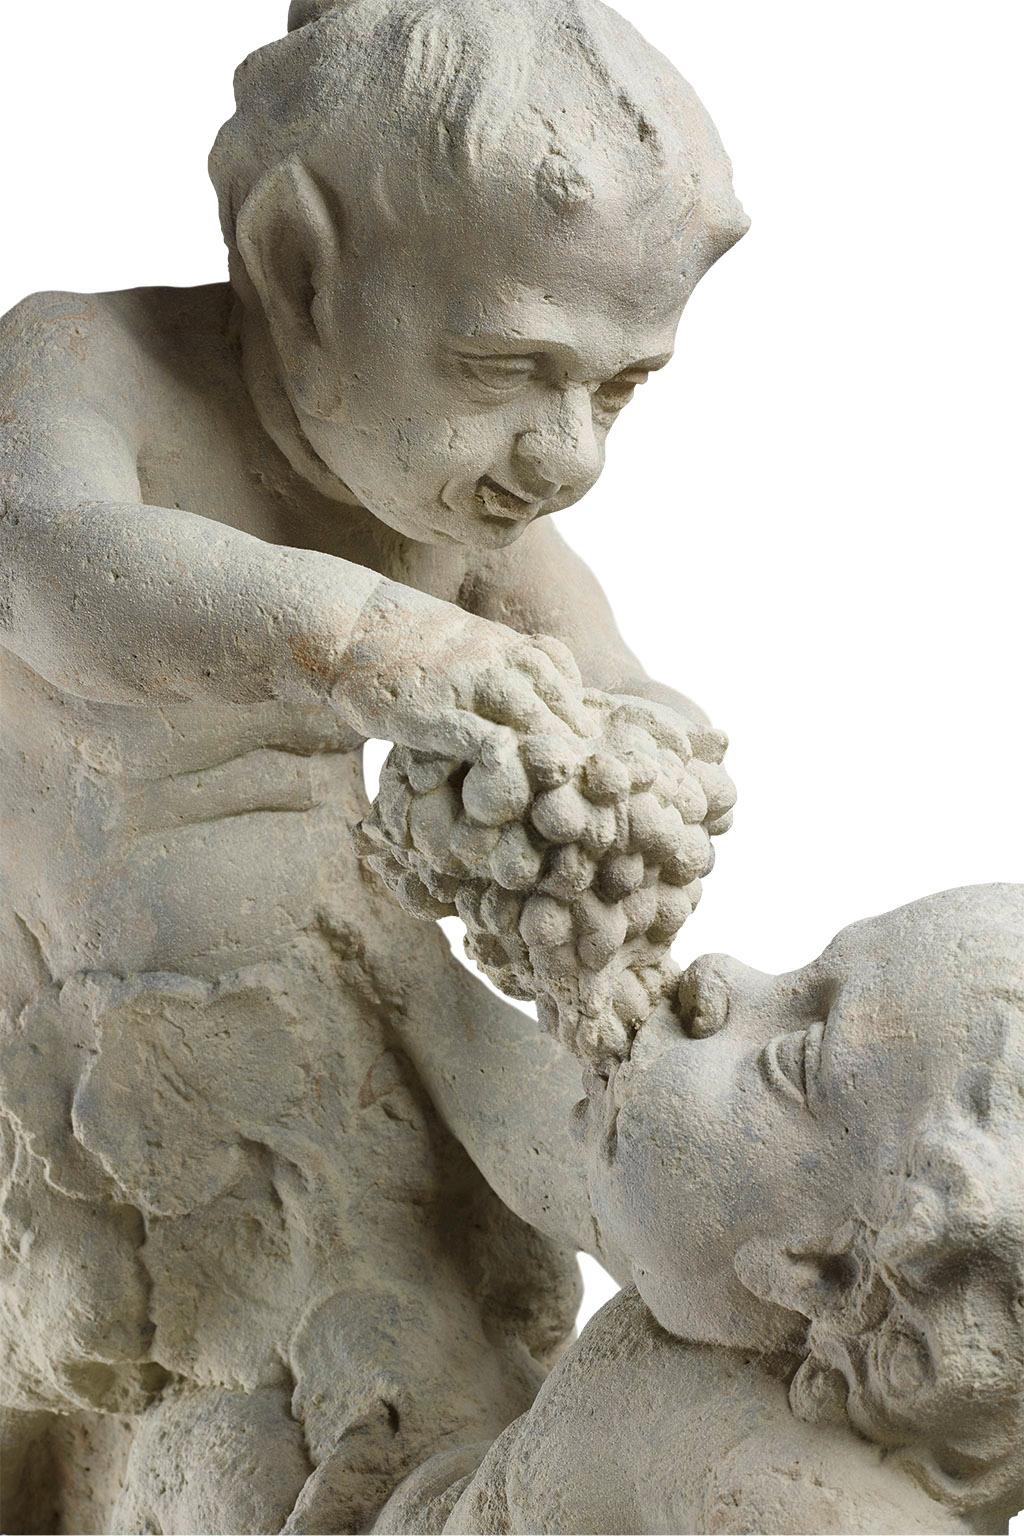 Franconia, around 1775
Sandstone. A putto sitting next to an overturned wine jug is being fed grapes by a small satyr. The almost life-size sculpture belonged - it can be assumed from the traces of weathering - to a lavishly decorated rococo garden